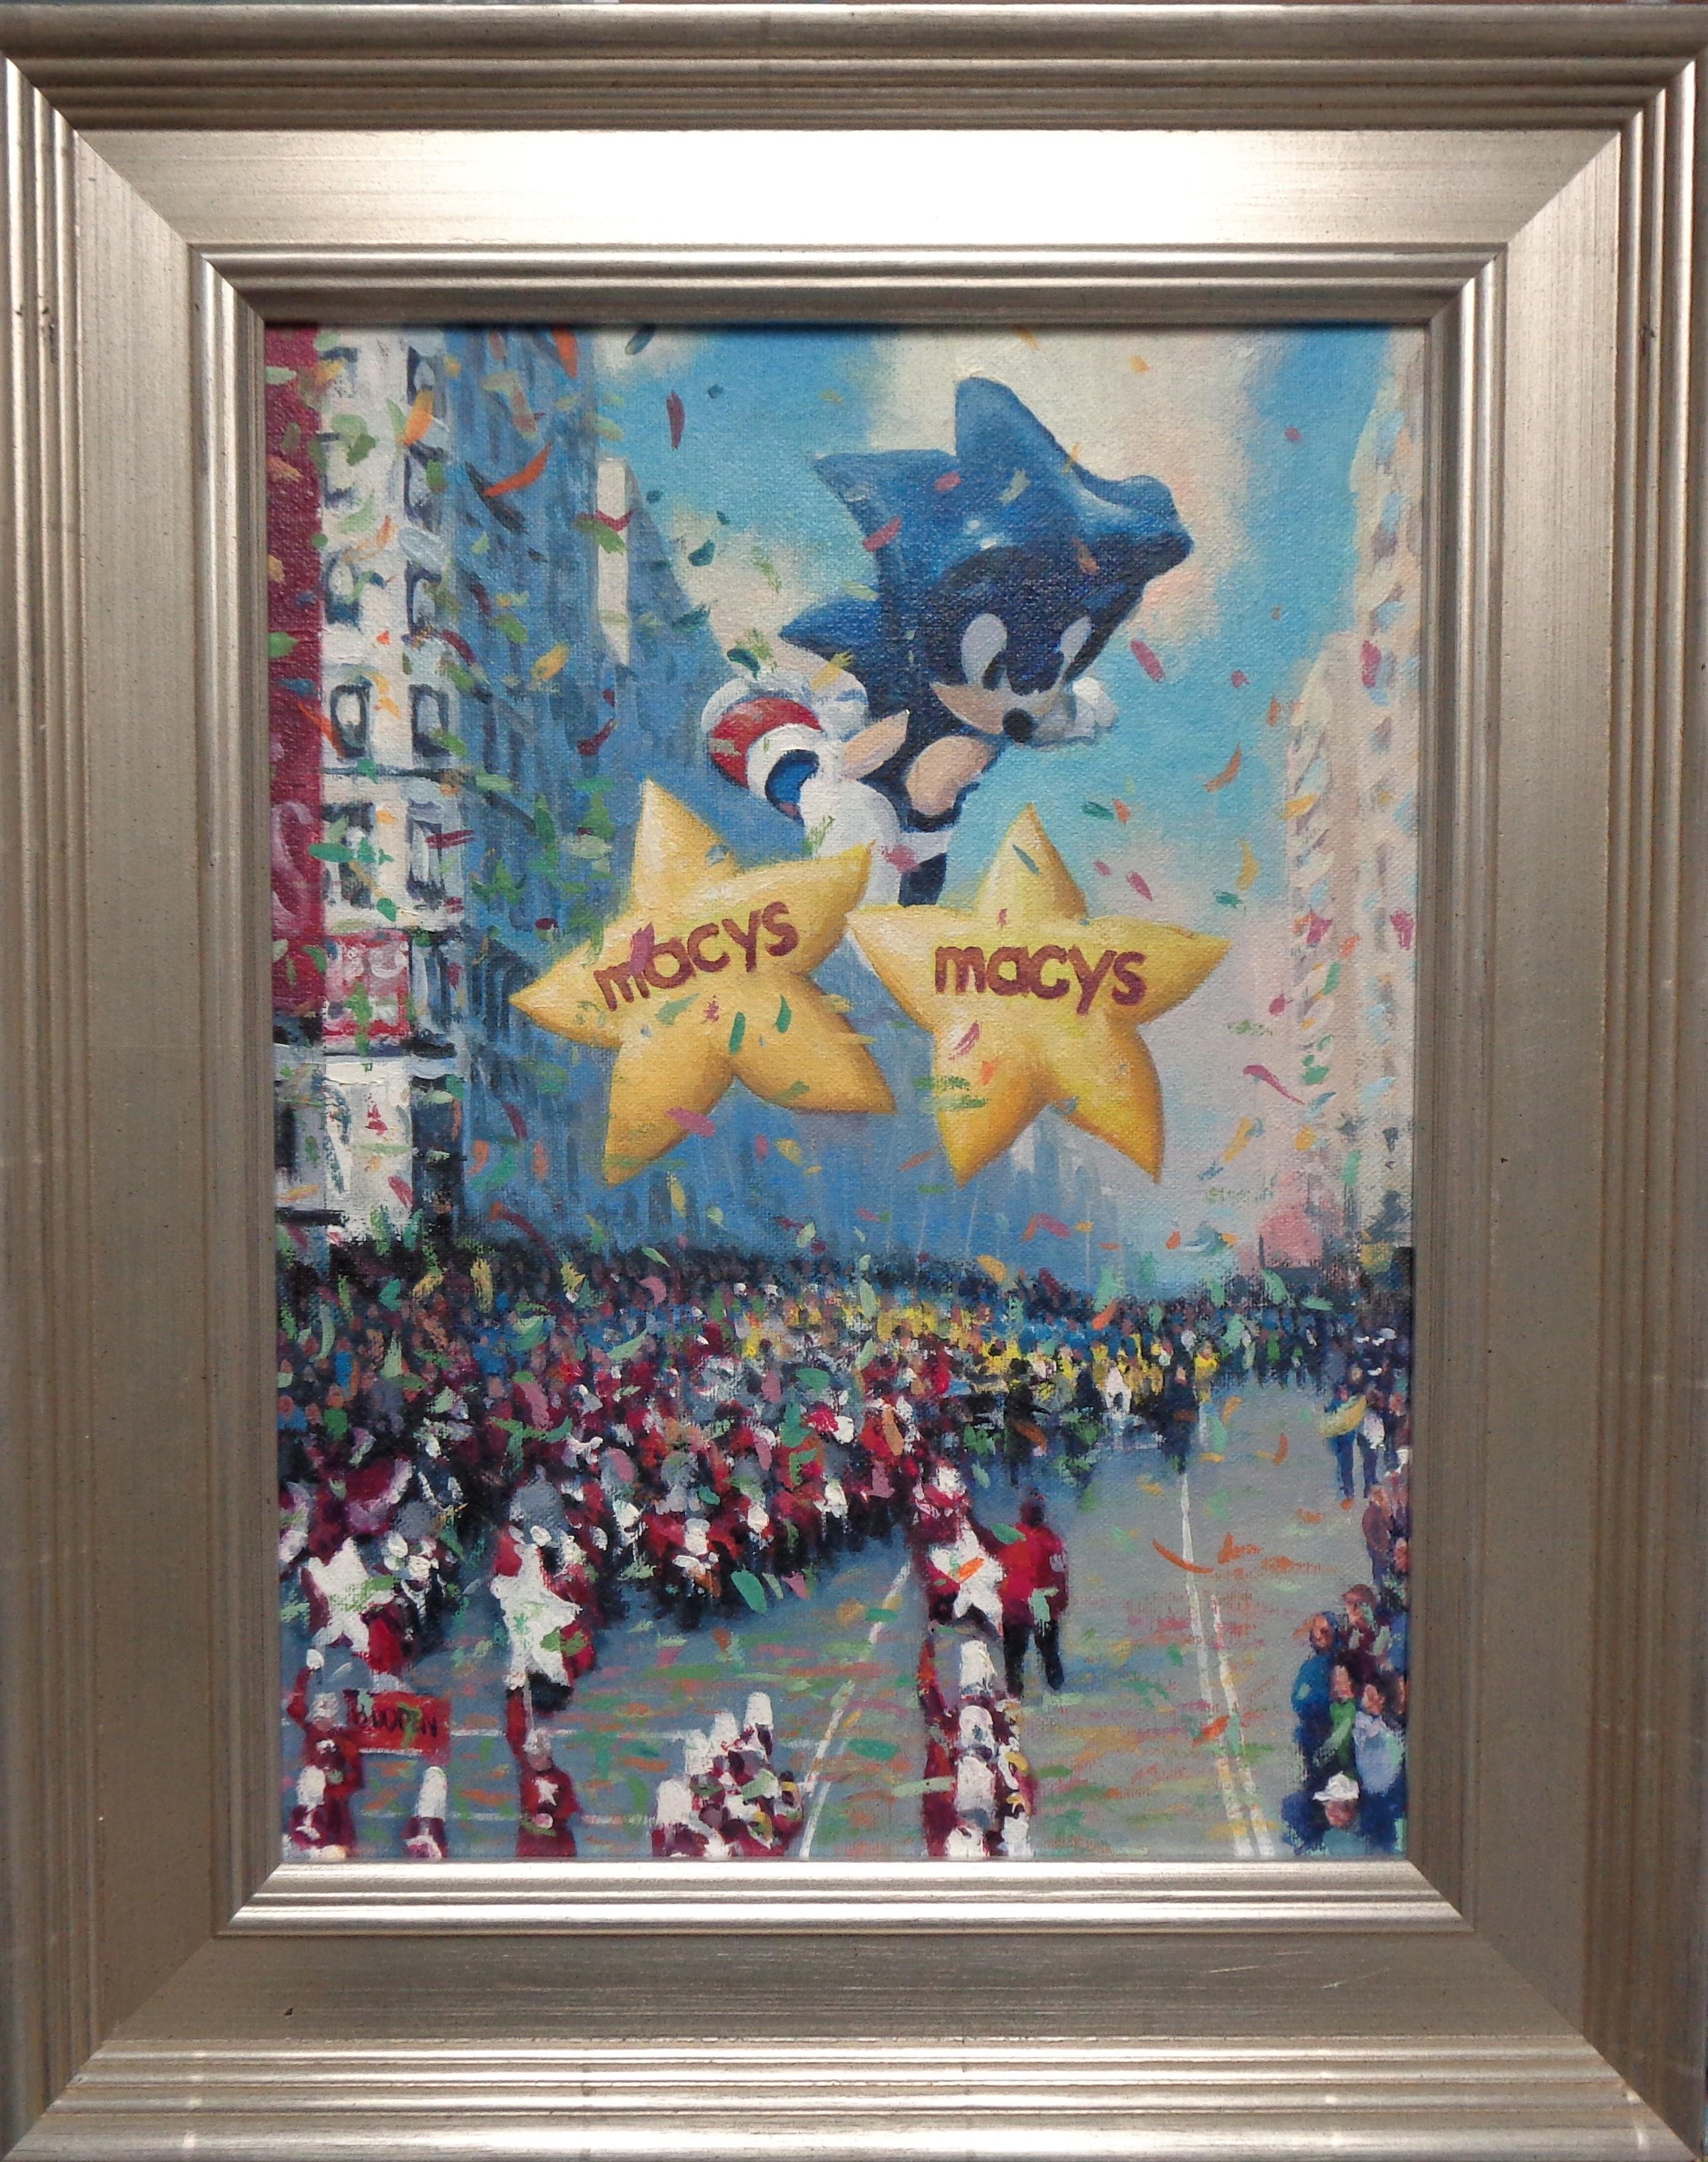 Macy's Stars & Sonic
Part of a series of 11 paintings.
An oil painting on canvas panel by award winning contemporary artist Michael Budden that showcases images from the Macy's Thanksgiving Parade, NYC. The image measures 12.25 x 9.25 unframed and